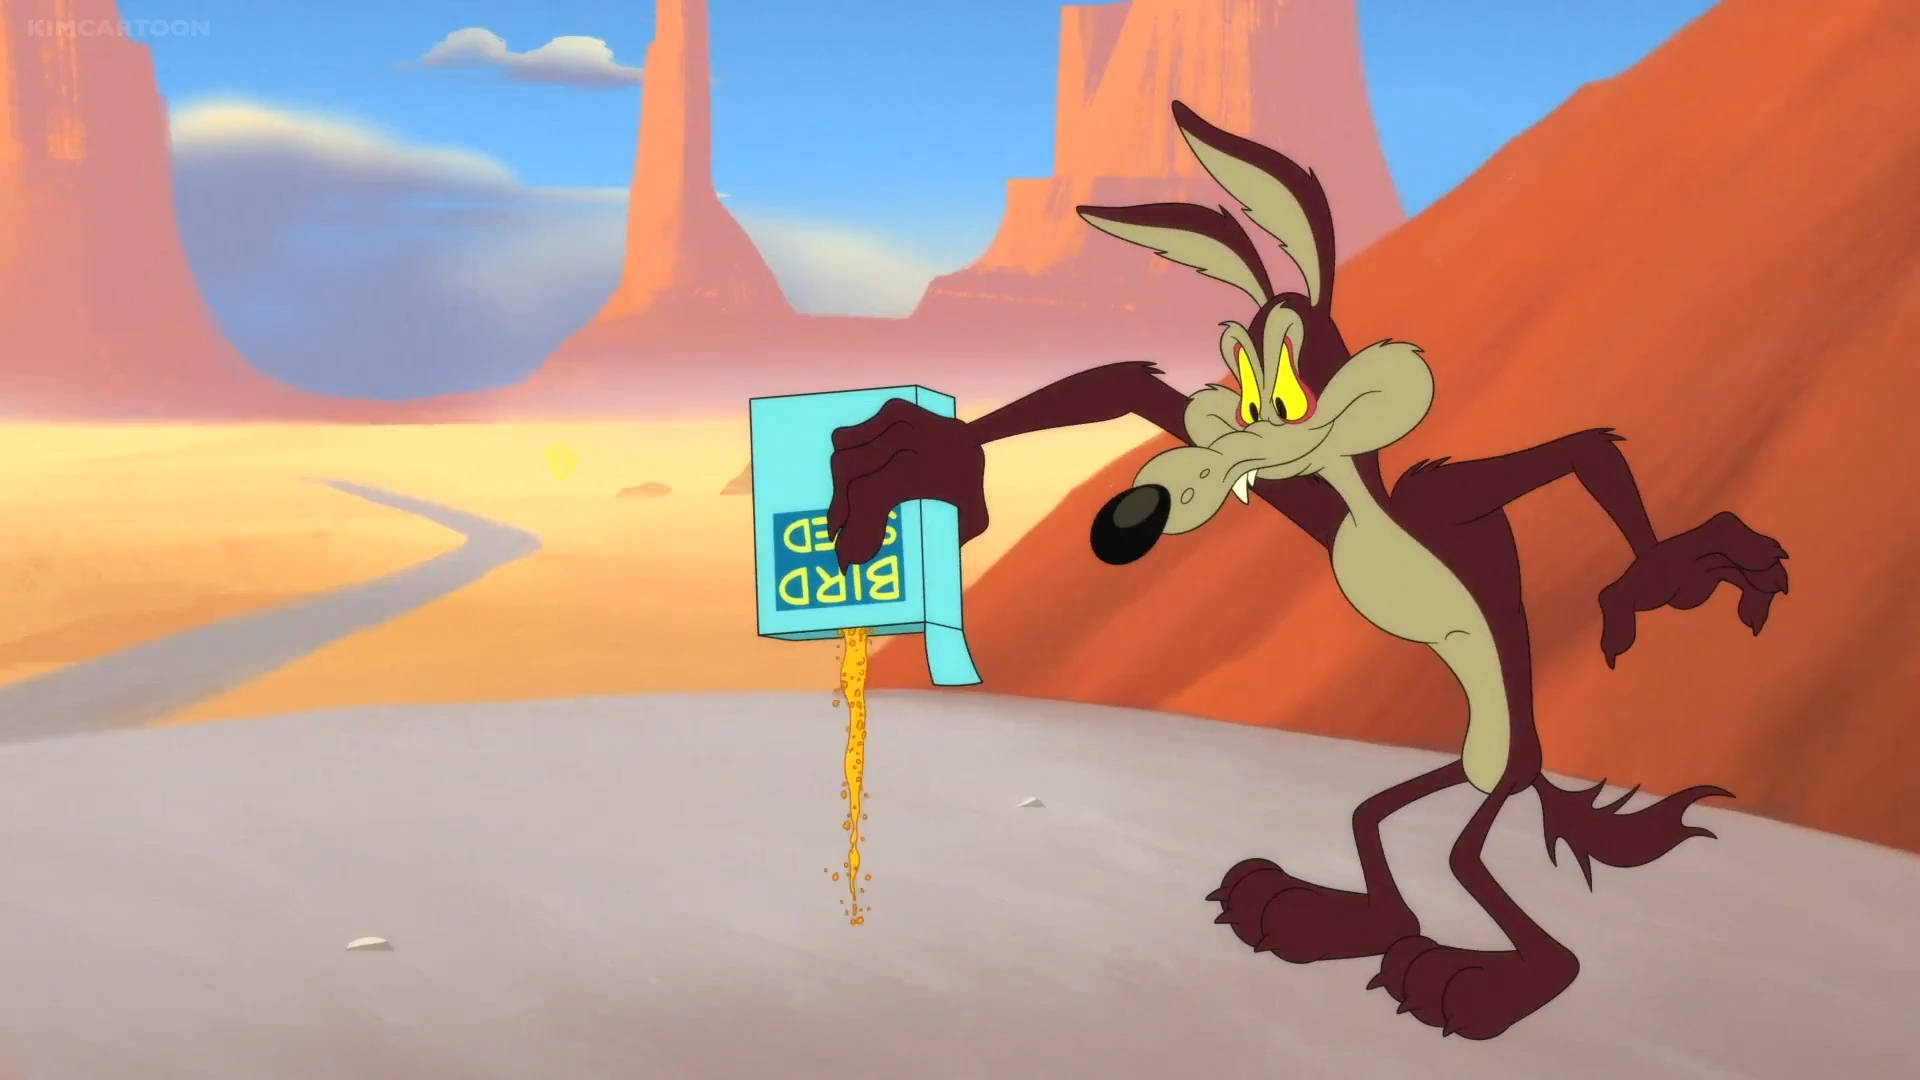 Wile E Coyote With Bird Seed Box Background